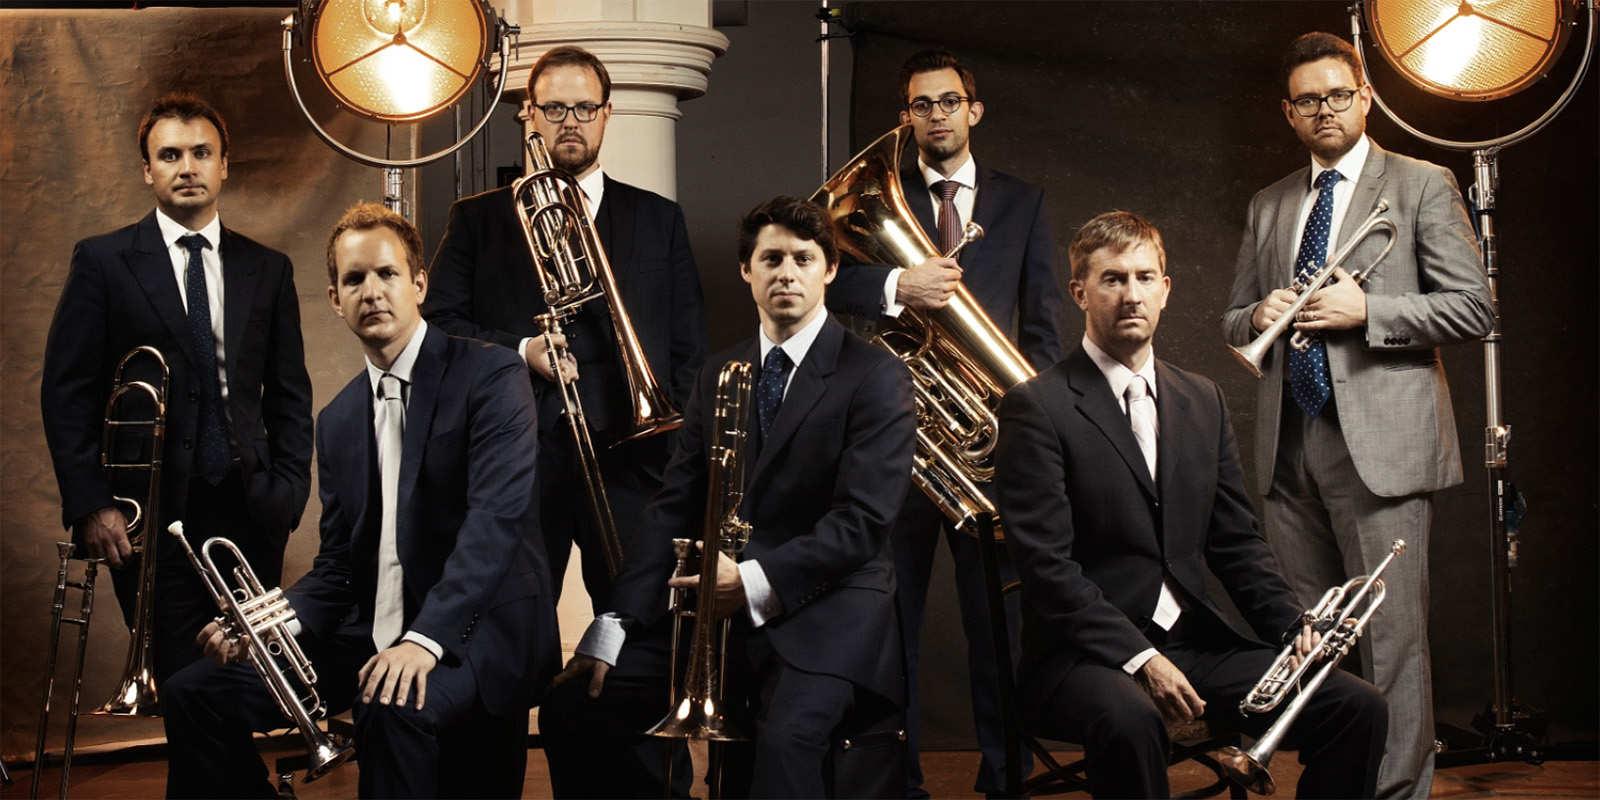 Seven men in suits sit and stand holding brass instruments